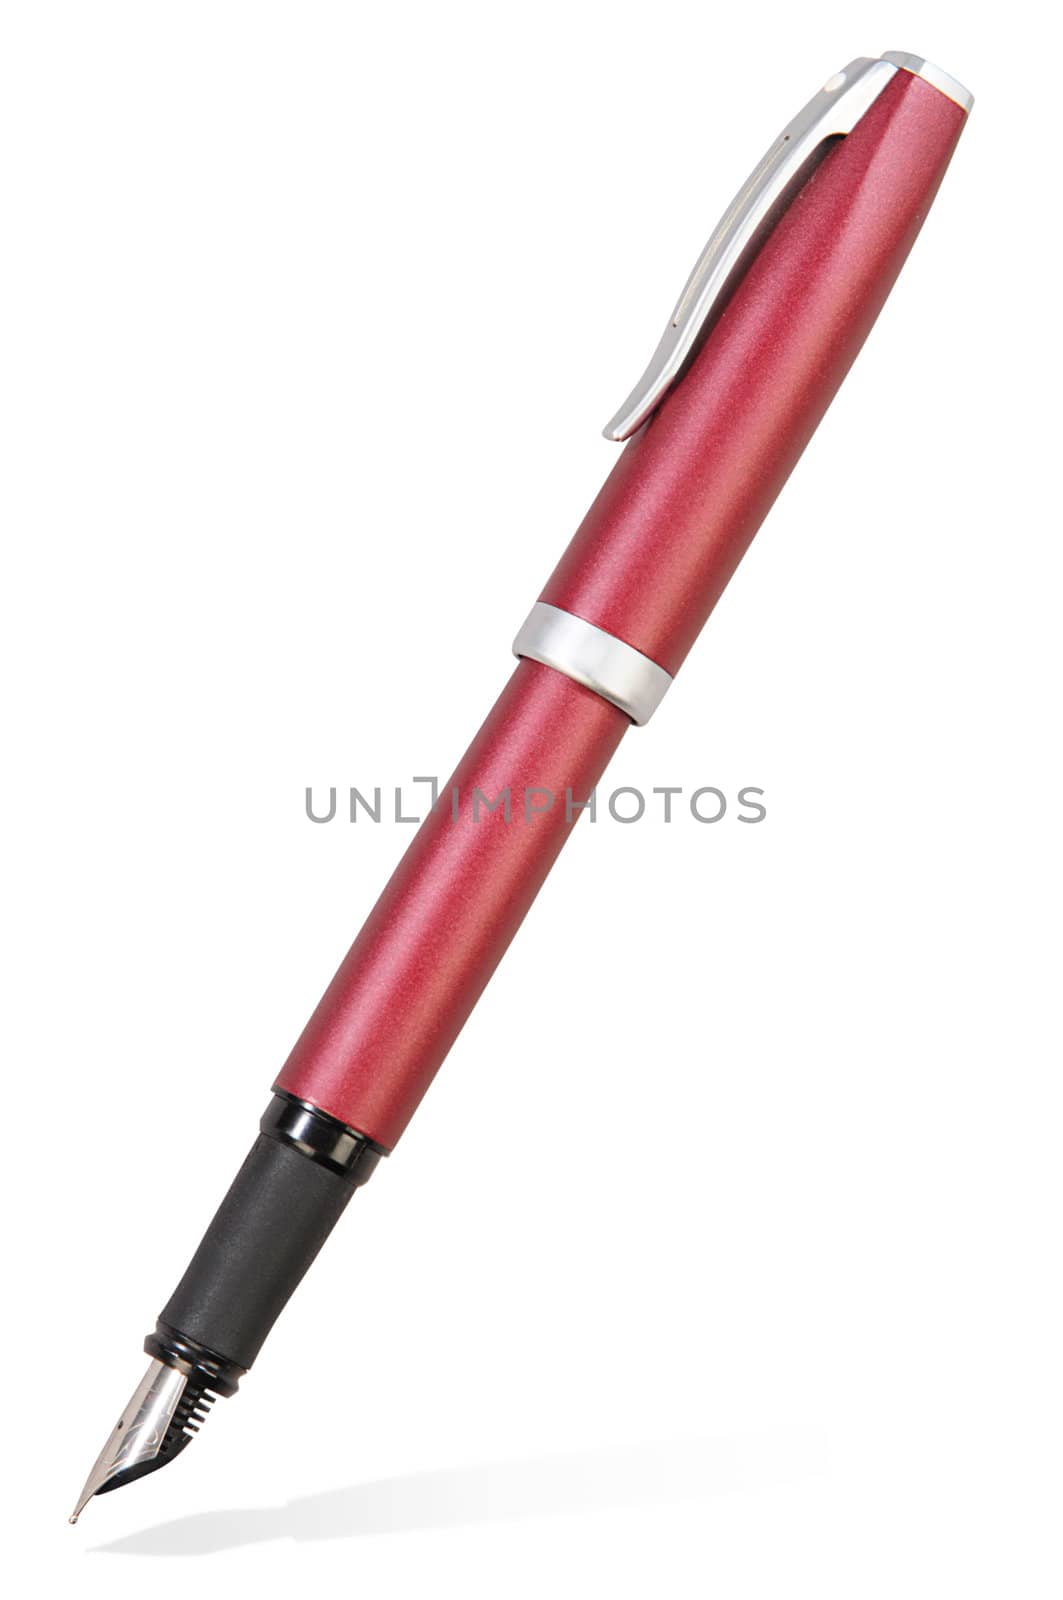 isolated red ink pen on white background